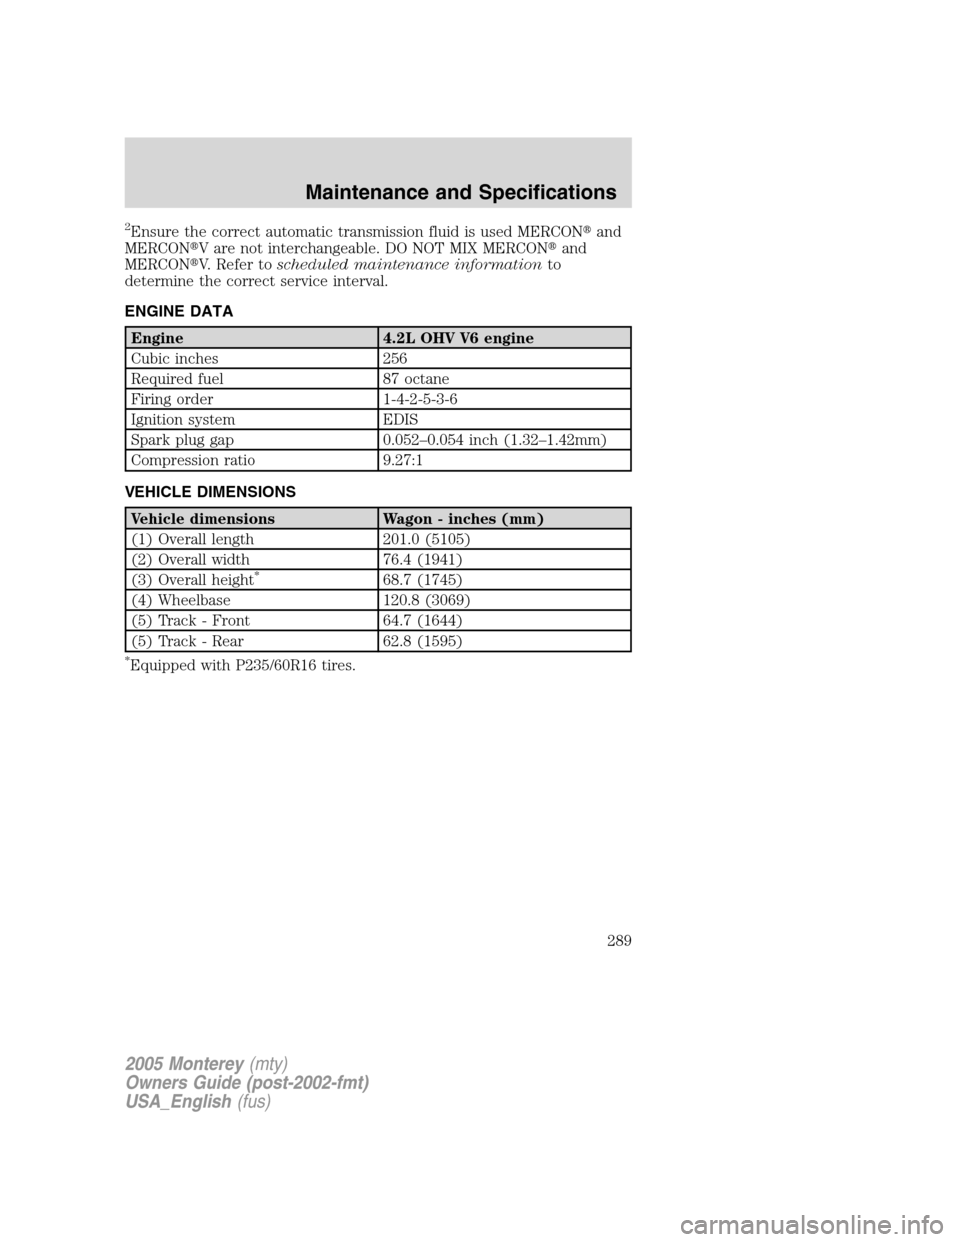 Mercury Monterey 2005  Owners Manuals 2Ensure the correct automatic transmission fluid is used MERCONand
MERCONV are not interchangeable. DO NOT MIX MERCONand
MERCONV. Refer toscheduled maintenance informationto
determine the correct 